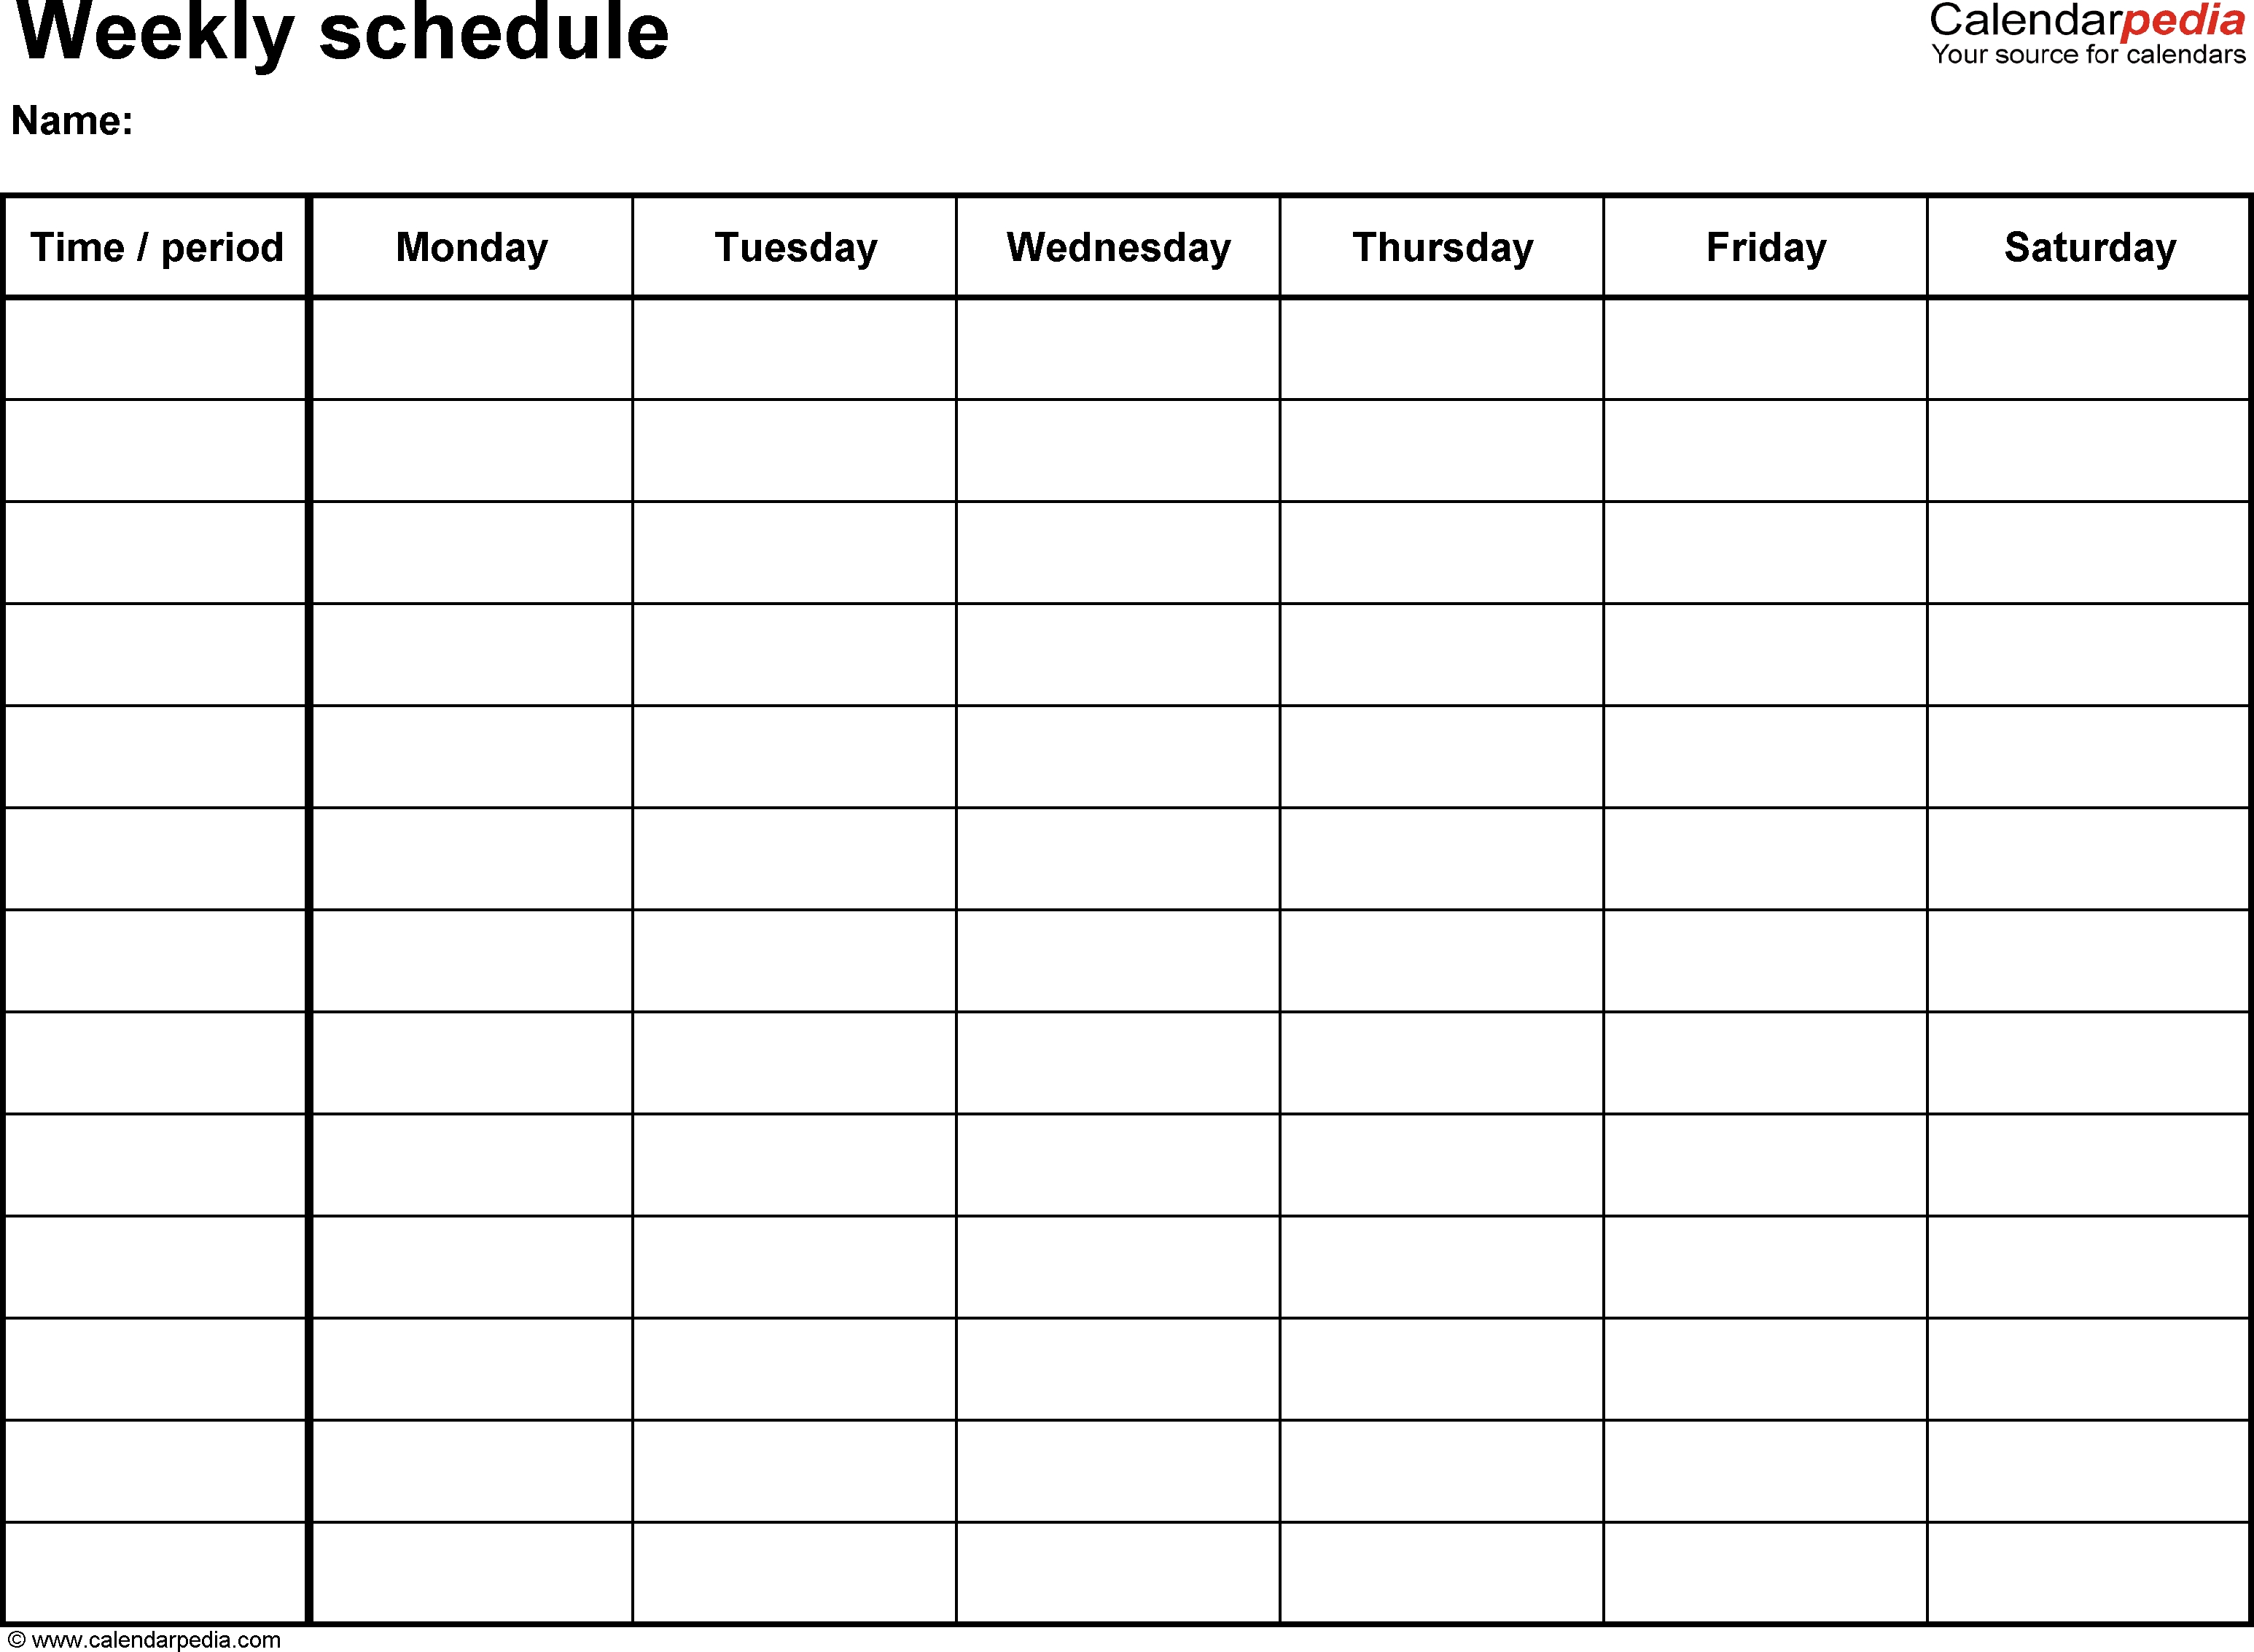 Free Weekly Schedule Templates For Word - 18 Templates Remarkable Blank Monday To Friday Calendar Template